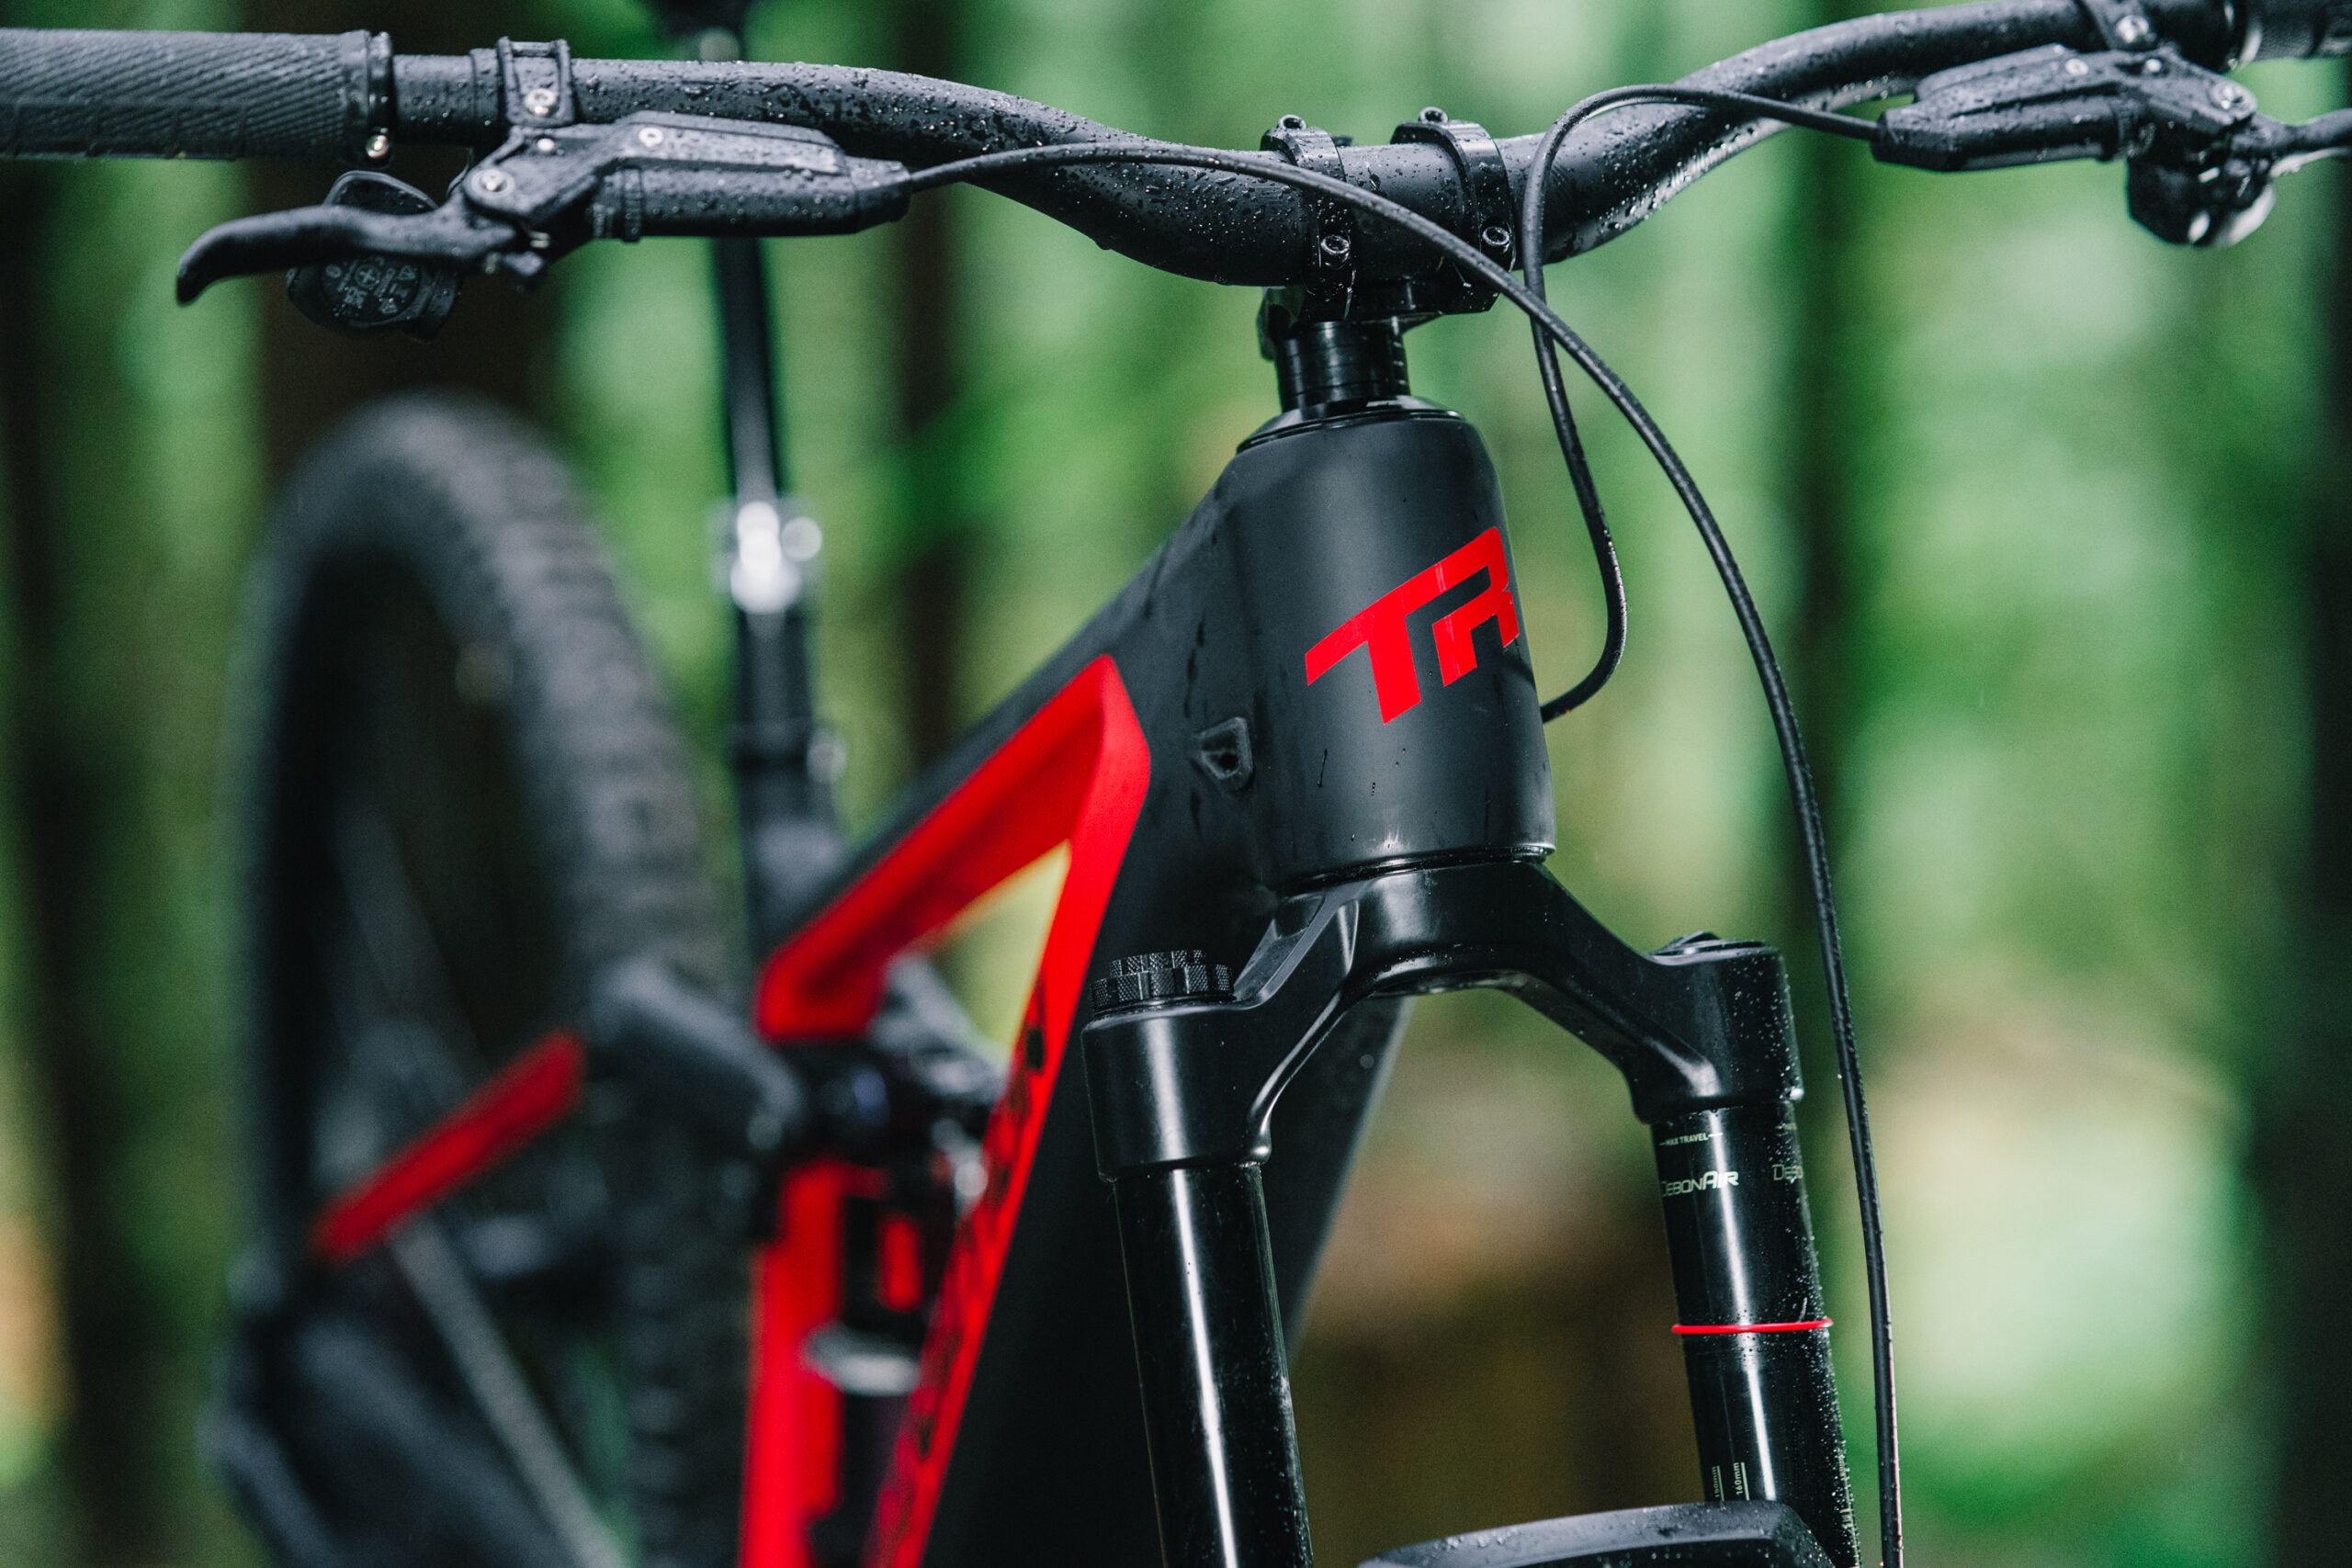 Simon Stewart reviews the Transition Repeater Powertrain for Blister